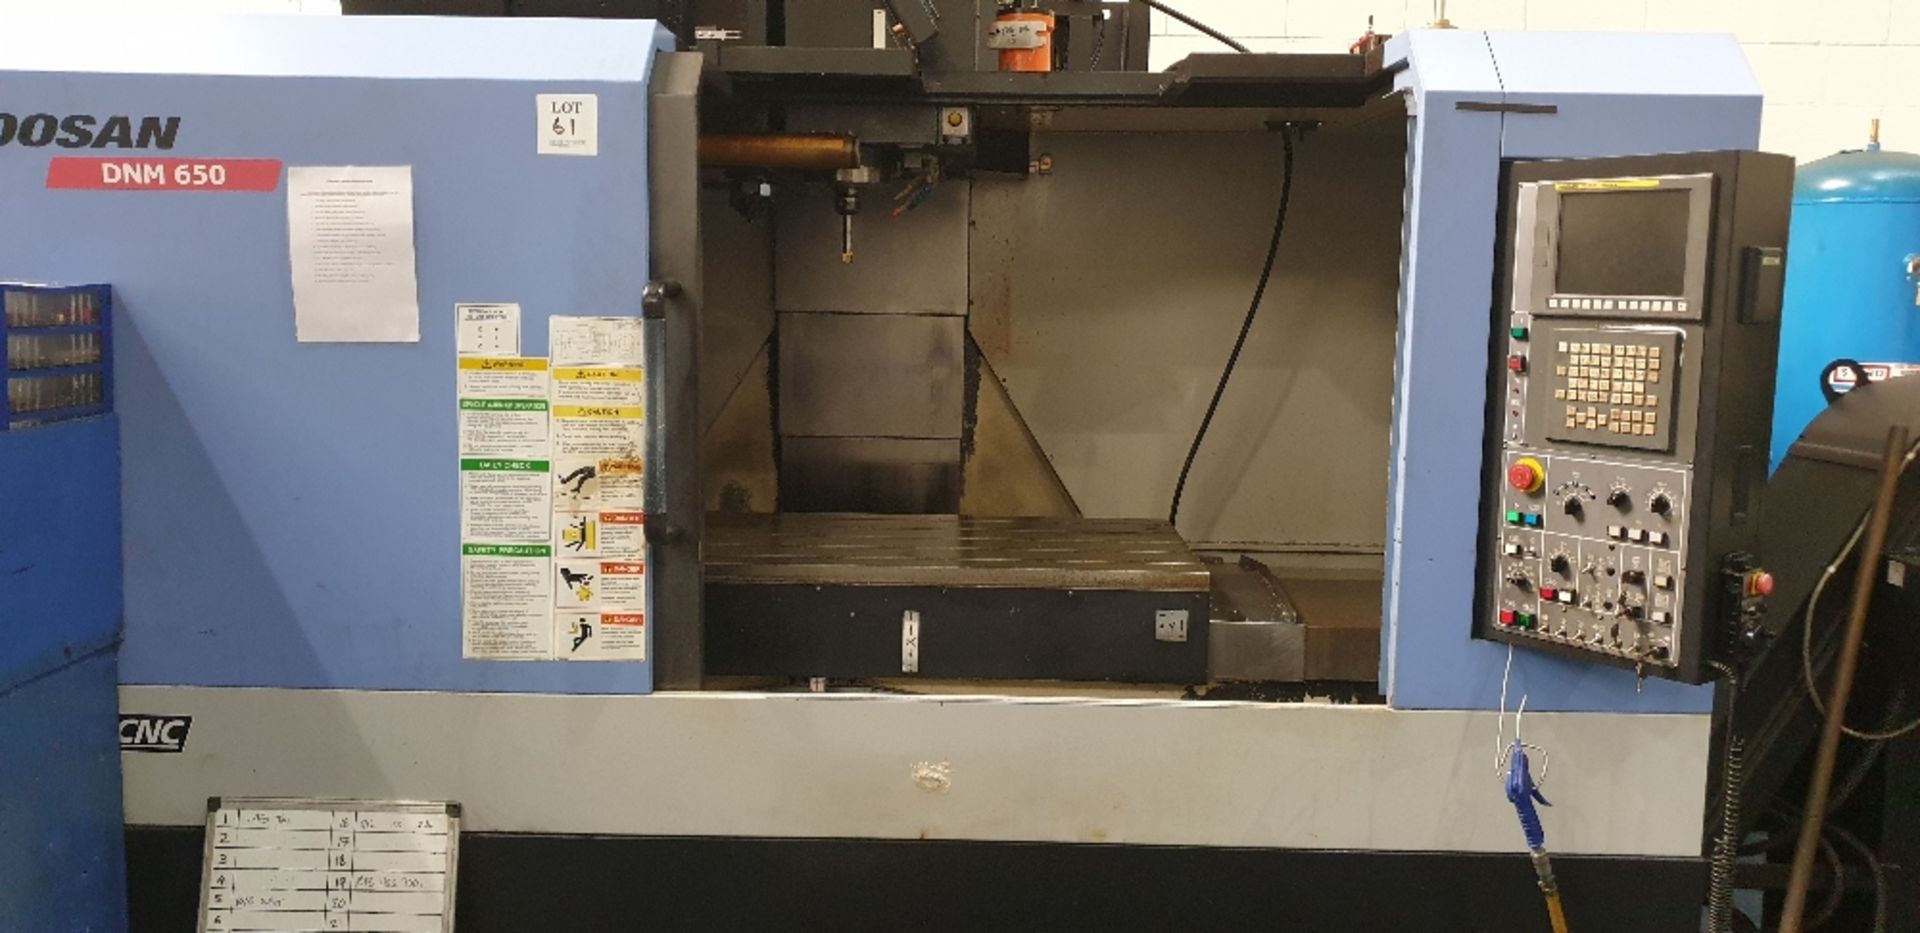 Doosan DNM 650 3 axis CNC machining centre. Serial No. 6500124. YOM 2010, tables, size 670 x 1300. - Image 2 of 3